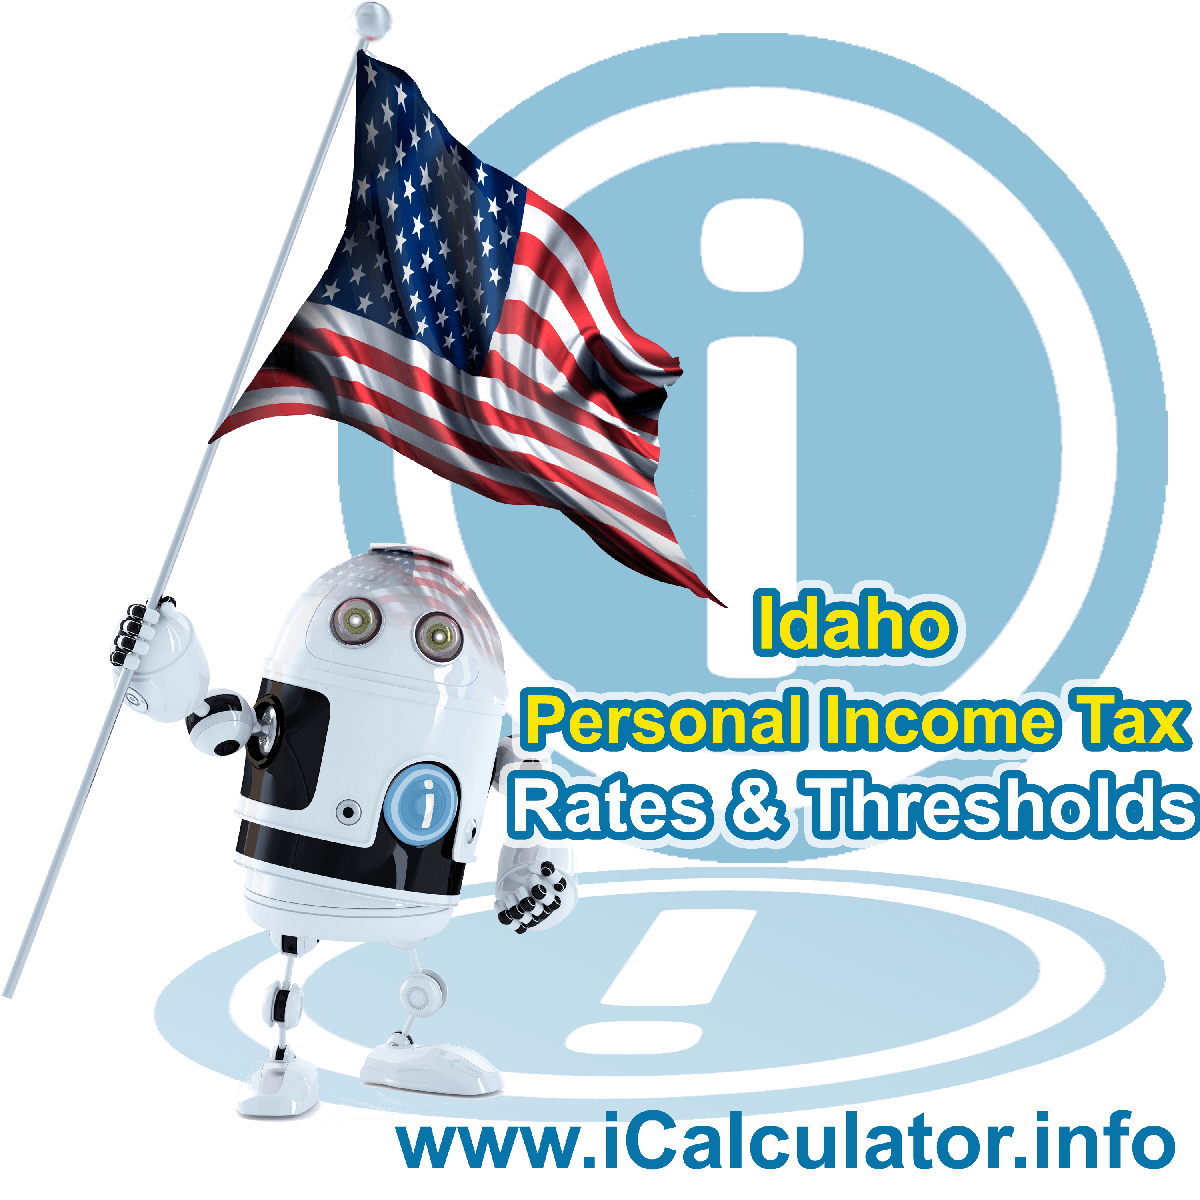 Idaho State Tax Tables 2021. This image displays details of the Idaho State Tax Tables for the 2021 tax return year which is provided in support of the 2021 US Tax Calculator